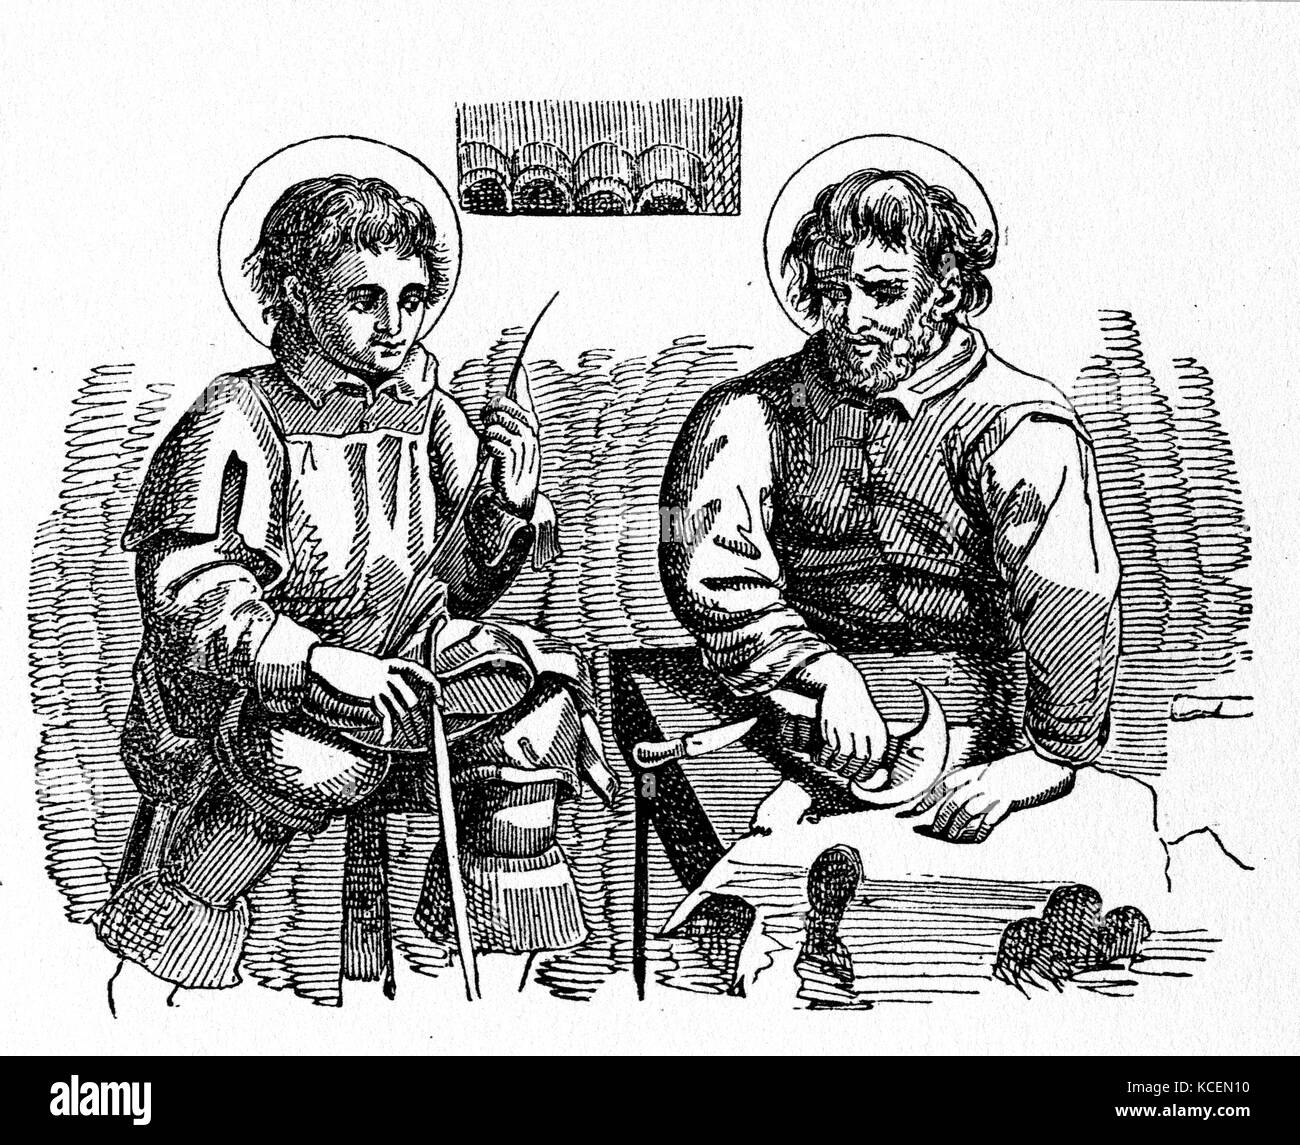 Saint CRISPIN AND CRISPINIAN, Christian martyr brothers: Martyred under Diocletian in 287 by being thrown into molten lead. Feast day 25 October: Patron Saint of SHOEMAKERS. Woodcut published London 1826 Stock Photo